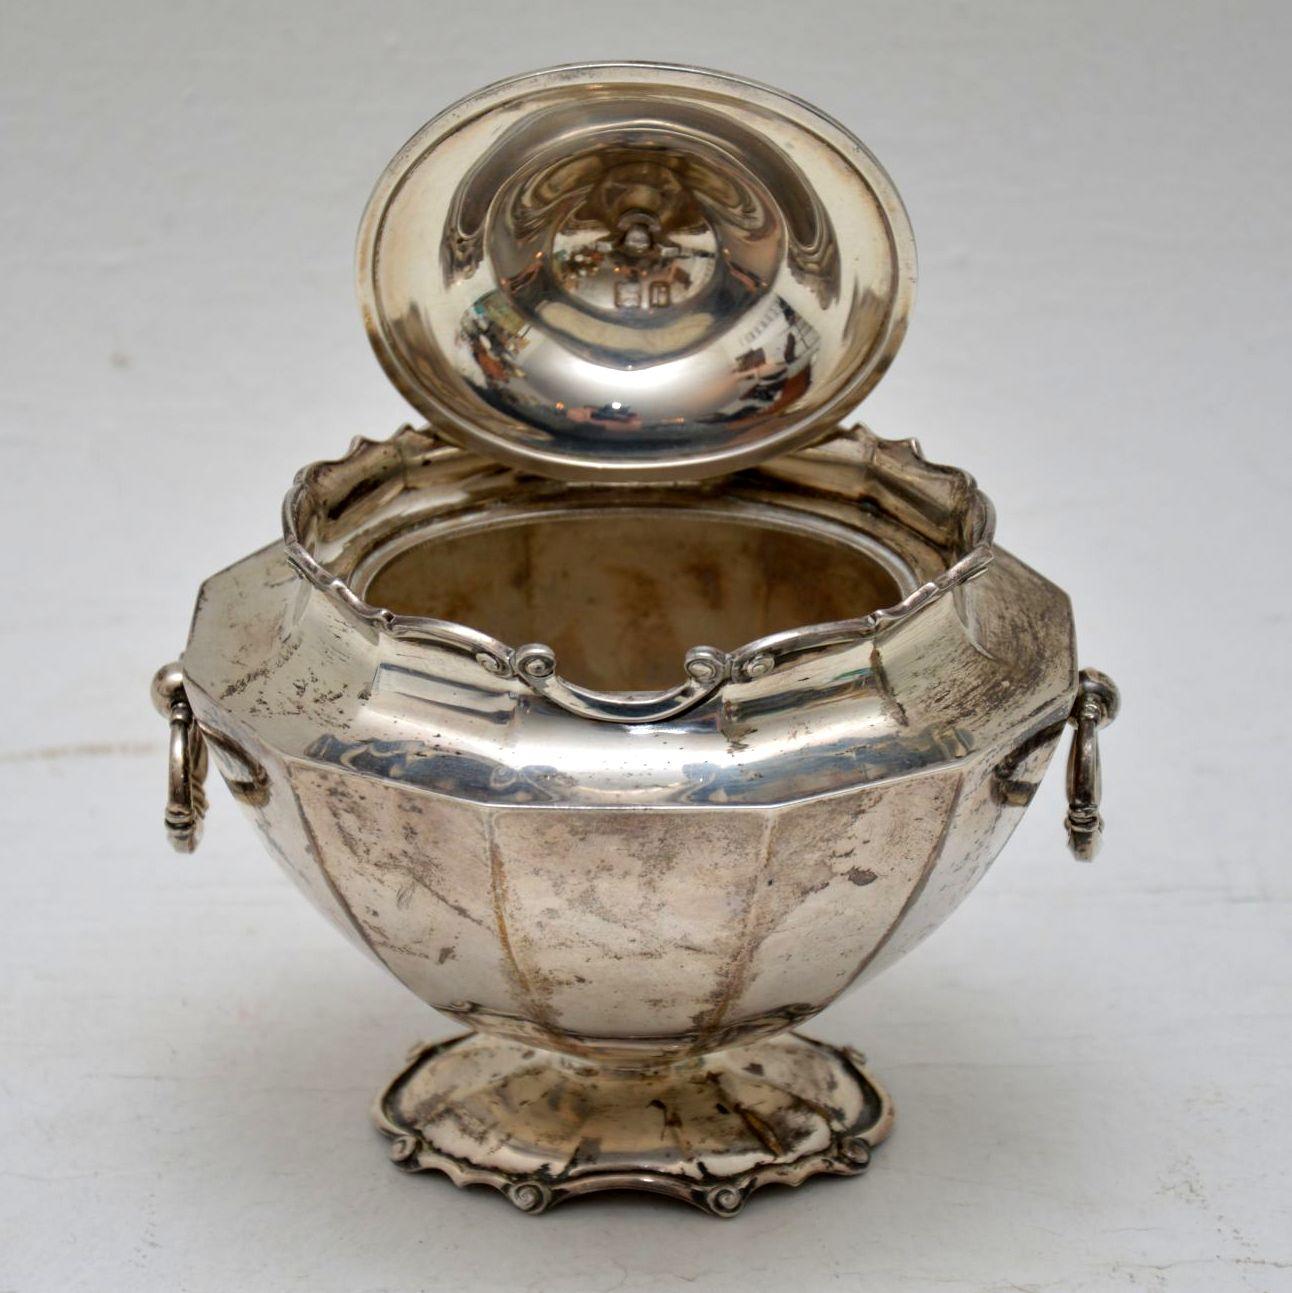 Antique Edwardian Solid Silver Tea Caddy C. 1912 For Sale 2